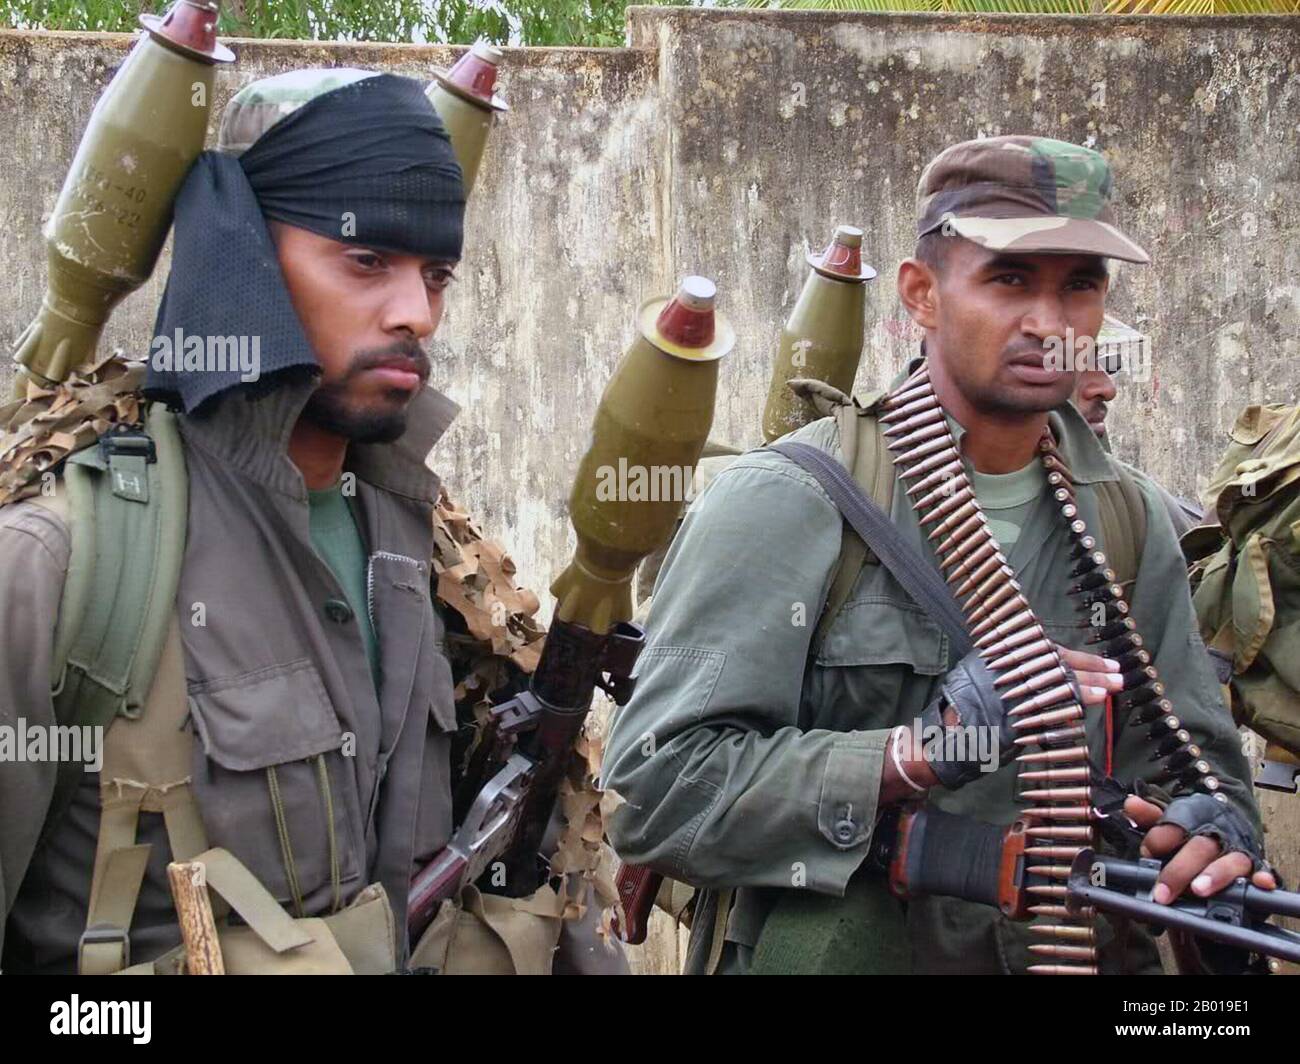 Sri Lanka: Heavily armed Sri Lanka Army soldiers preparing to advance on LTTE positions, c. 2008. Photo from the Sri Lanka Ministry of Defence (CC By-SA 3.0 License).  The Sri Lankan Civil War was a conflict fought on the island of Sri Lanka. Beginning on 23 June, 1983, there was an on-and-off insurgency against the government by the Liberation Tigers of Tamil Eelam (the LTTE, also known as the Tamil Tigers and other few rebel groups), a separatist militant organization which fought to create an independent Tamil state named Tamil Eelam in the north and the east of the island. Stock Photo